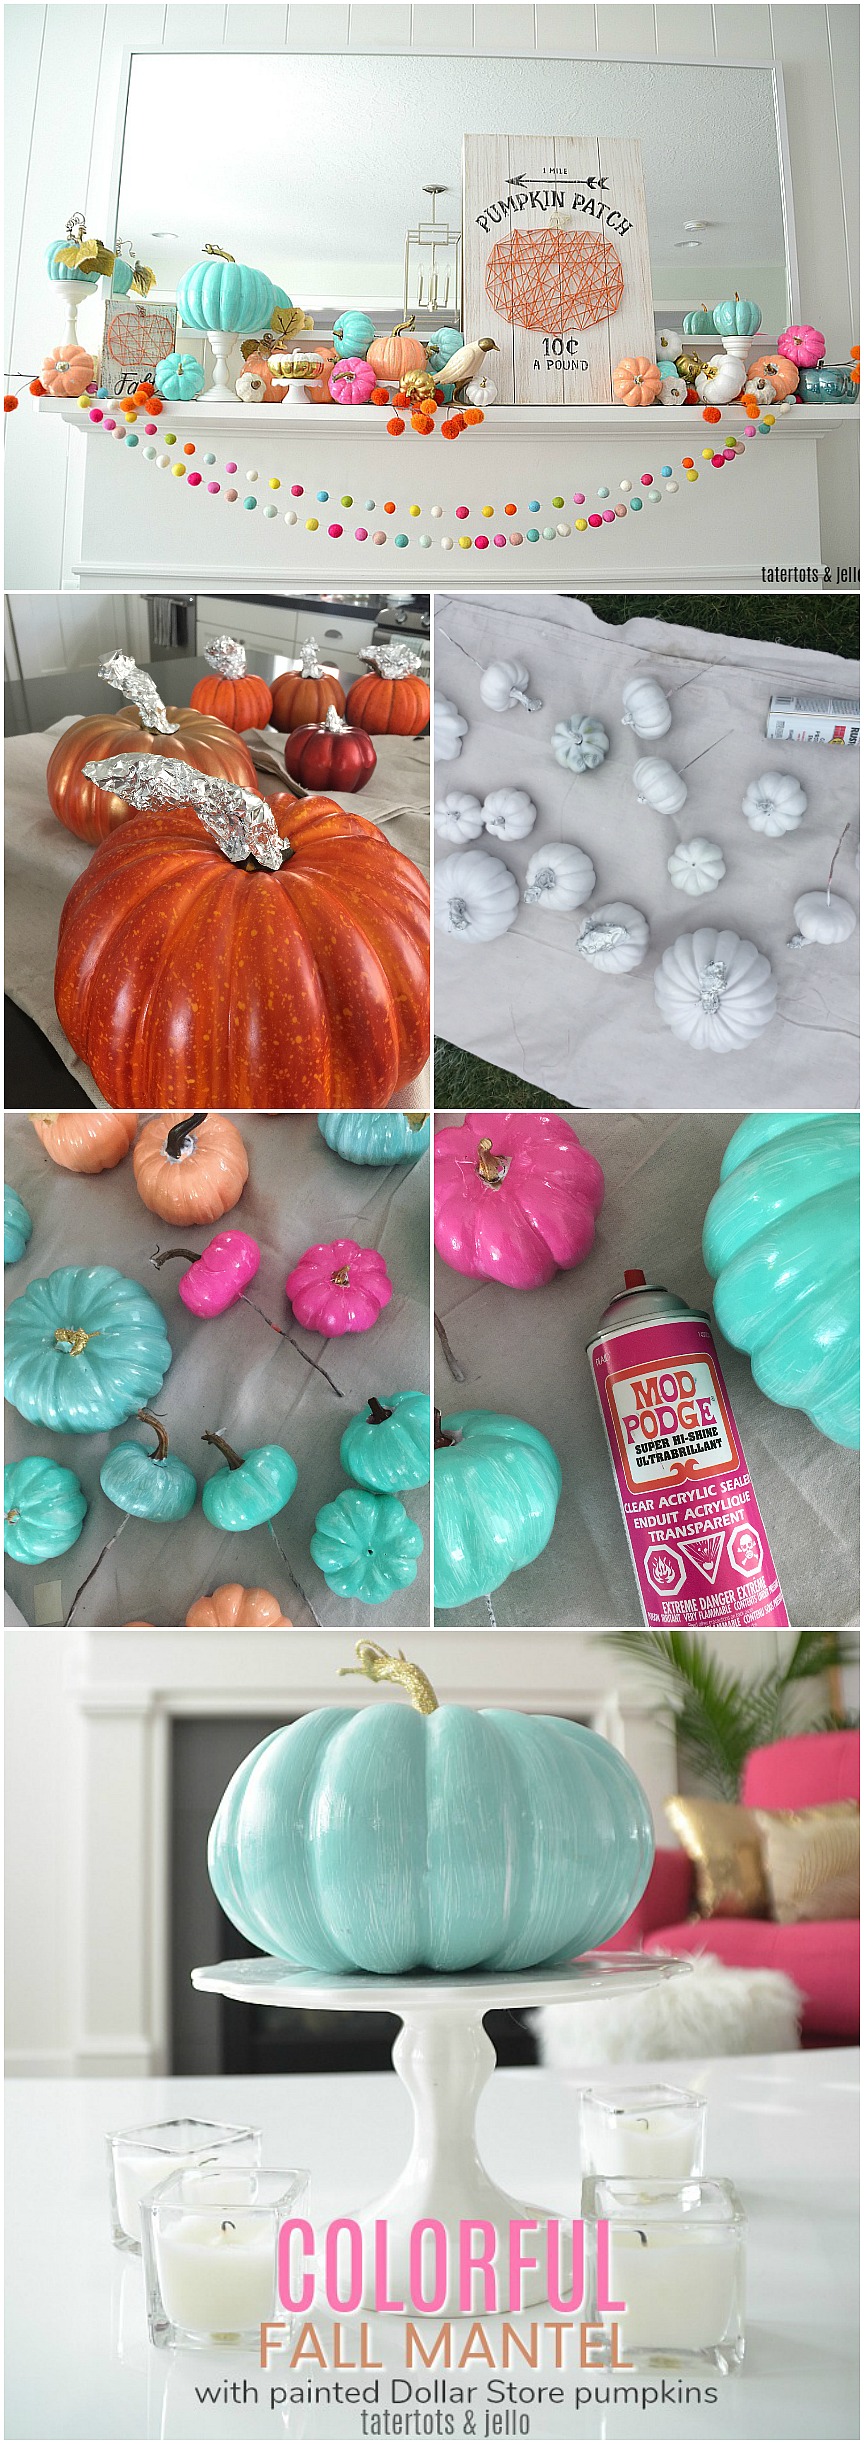 how to paint dollar tree foam pumpkins colorful colors